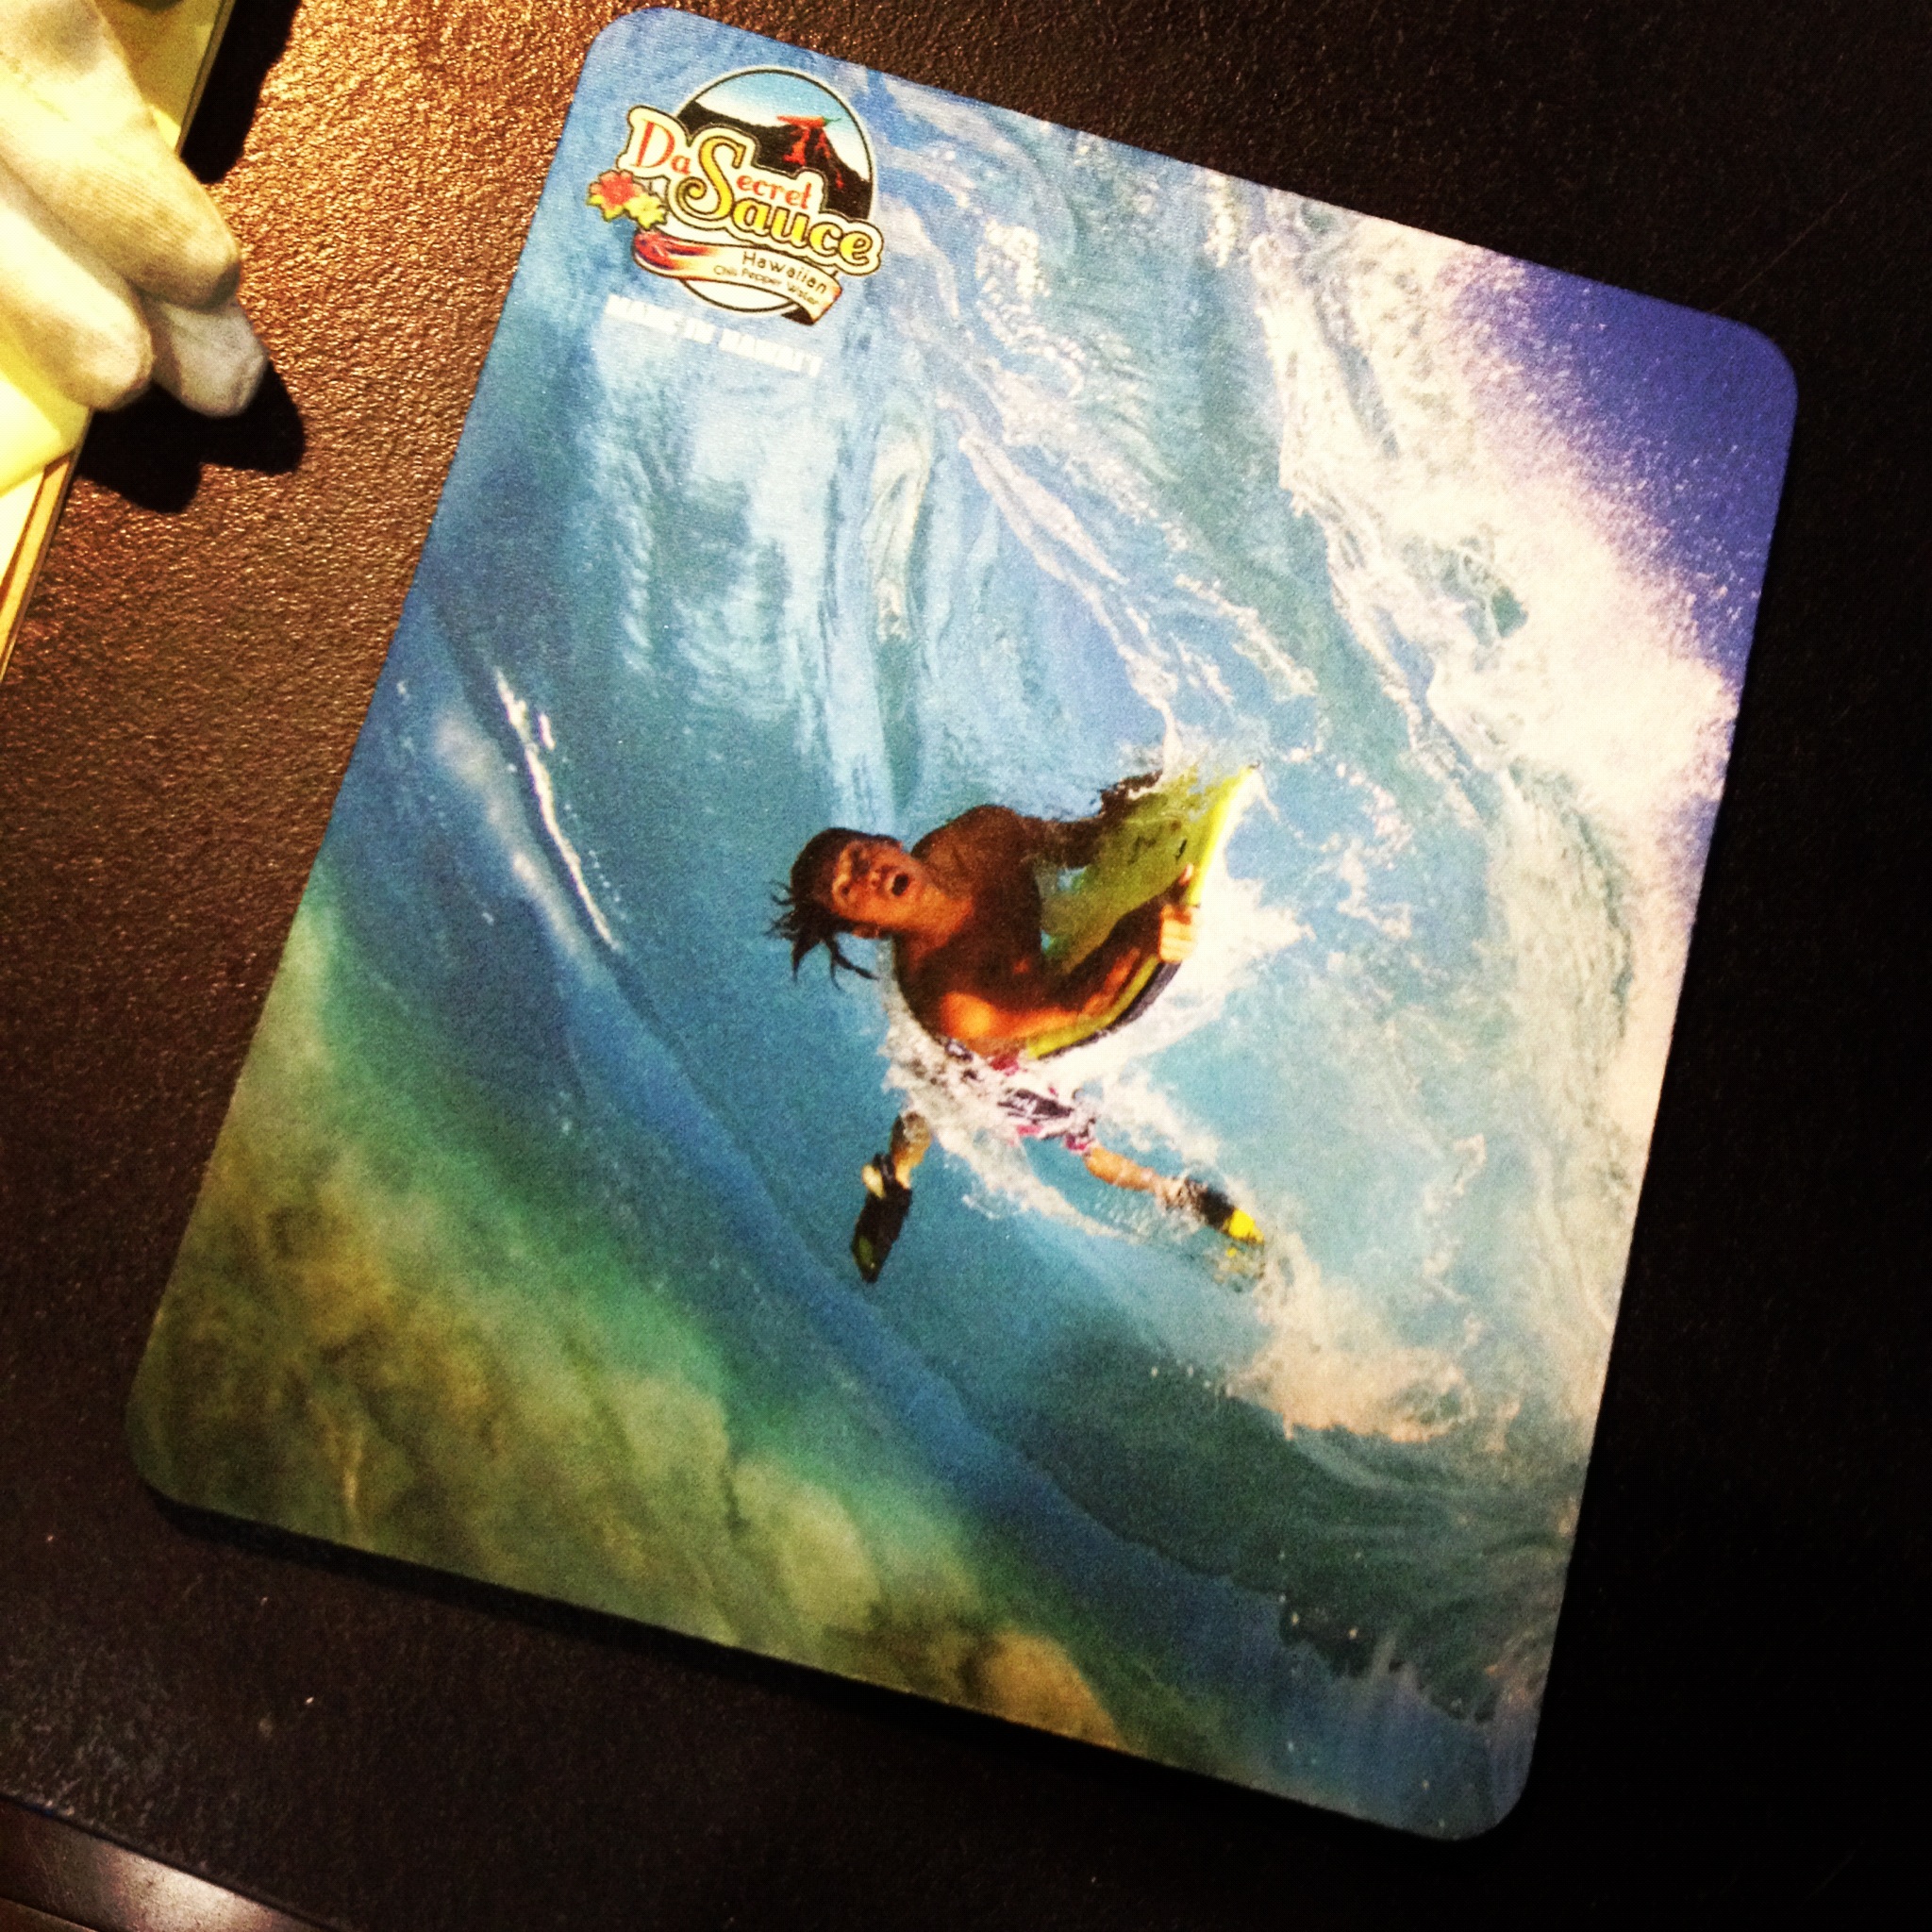 MousePad made with sublimation printing